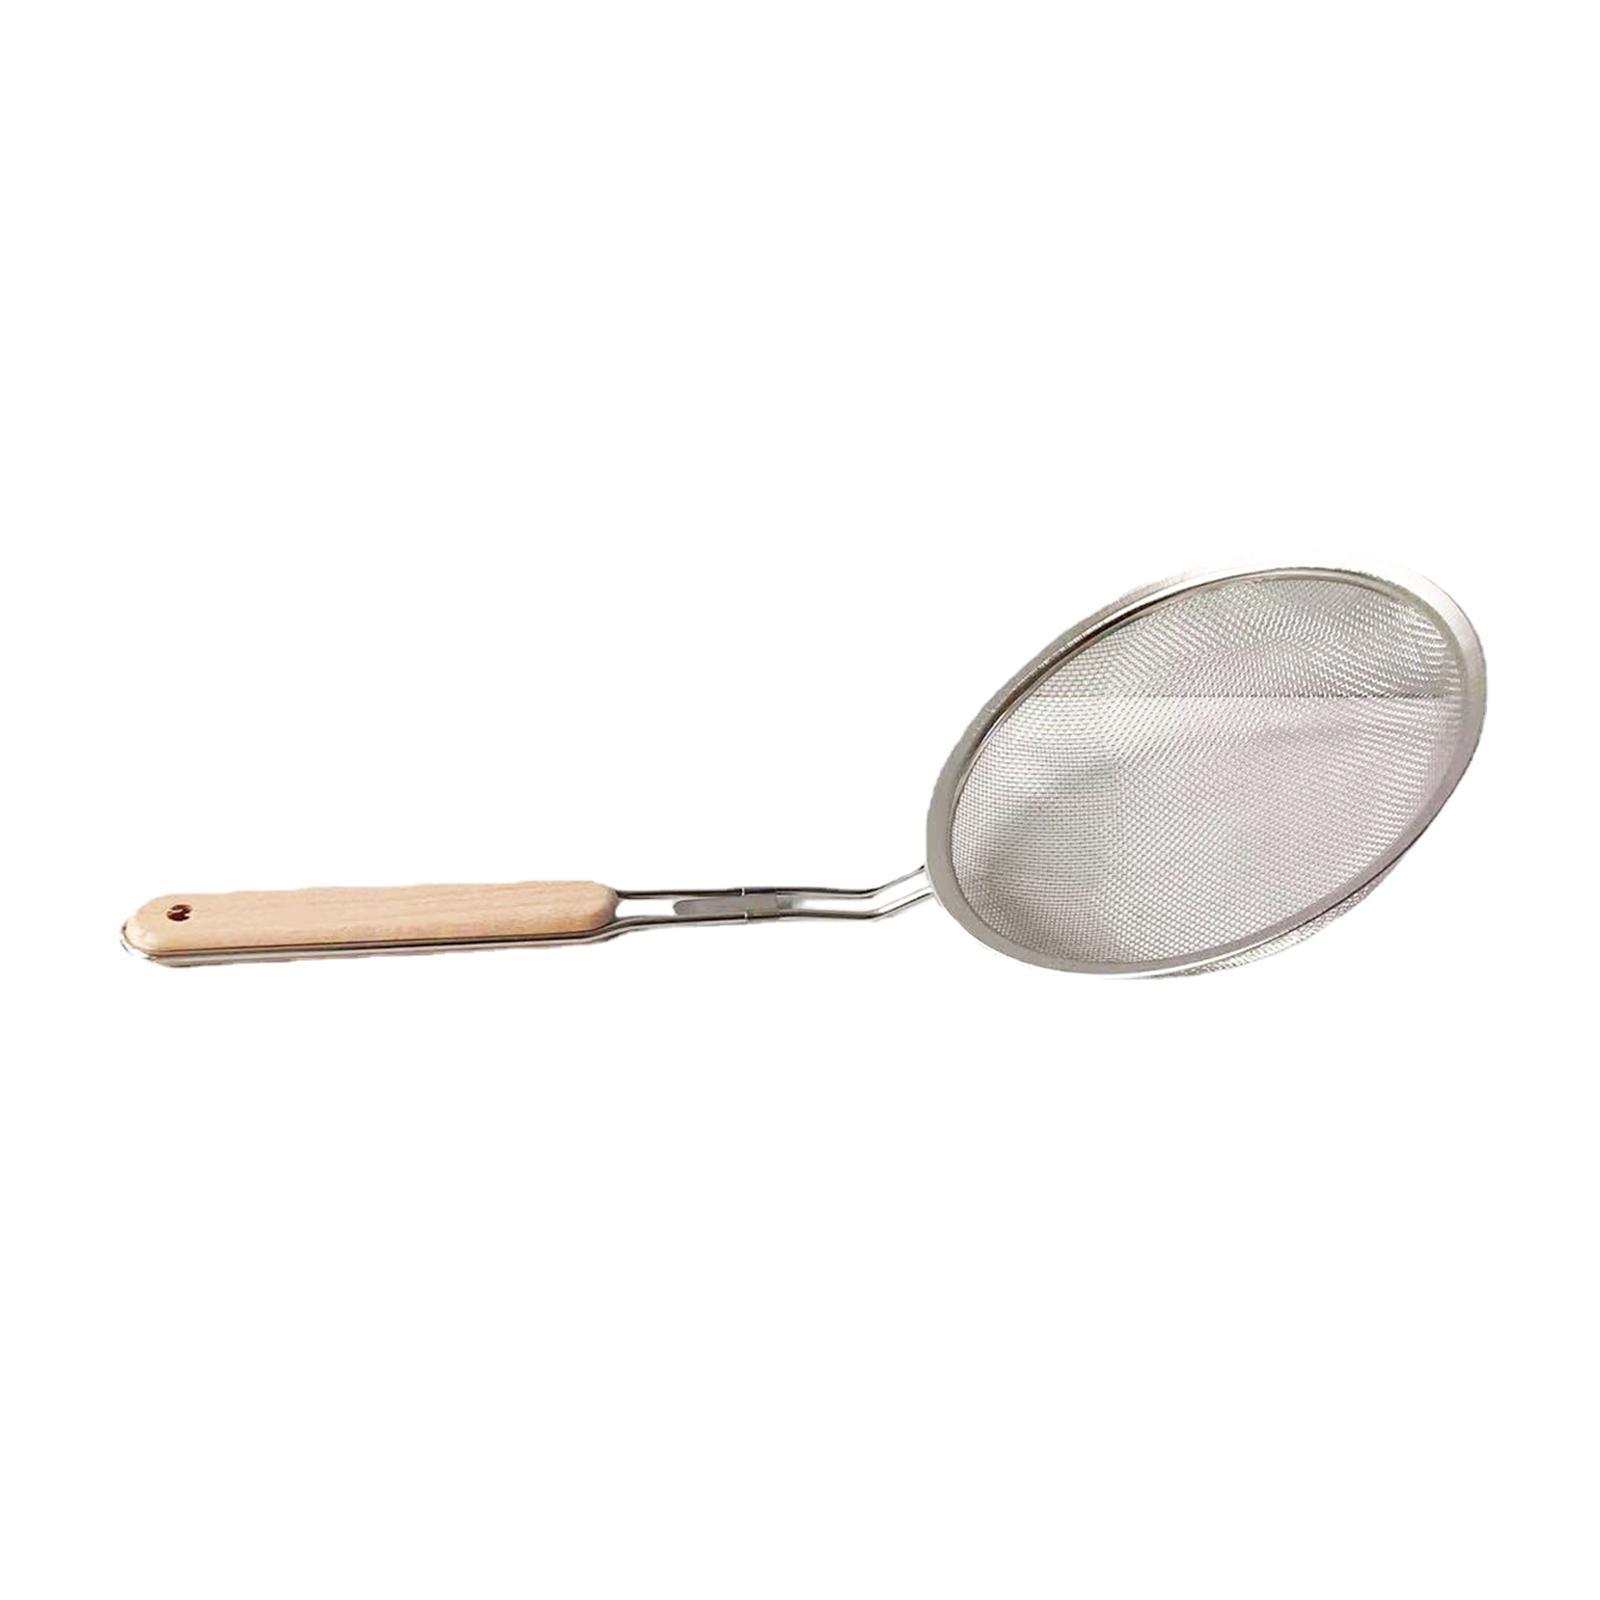 Skimmer Spoon with Long Wooden Handle for Skimming , Foam and Gravy